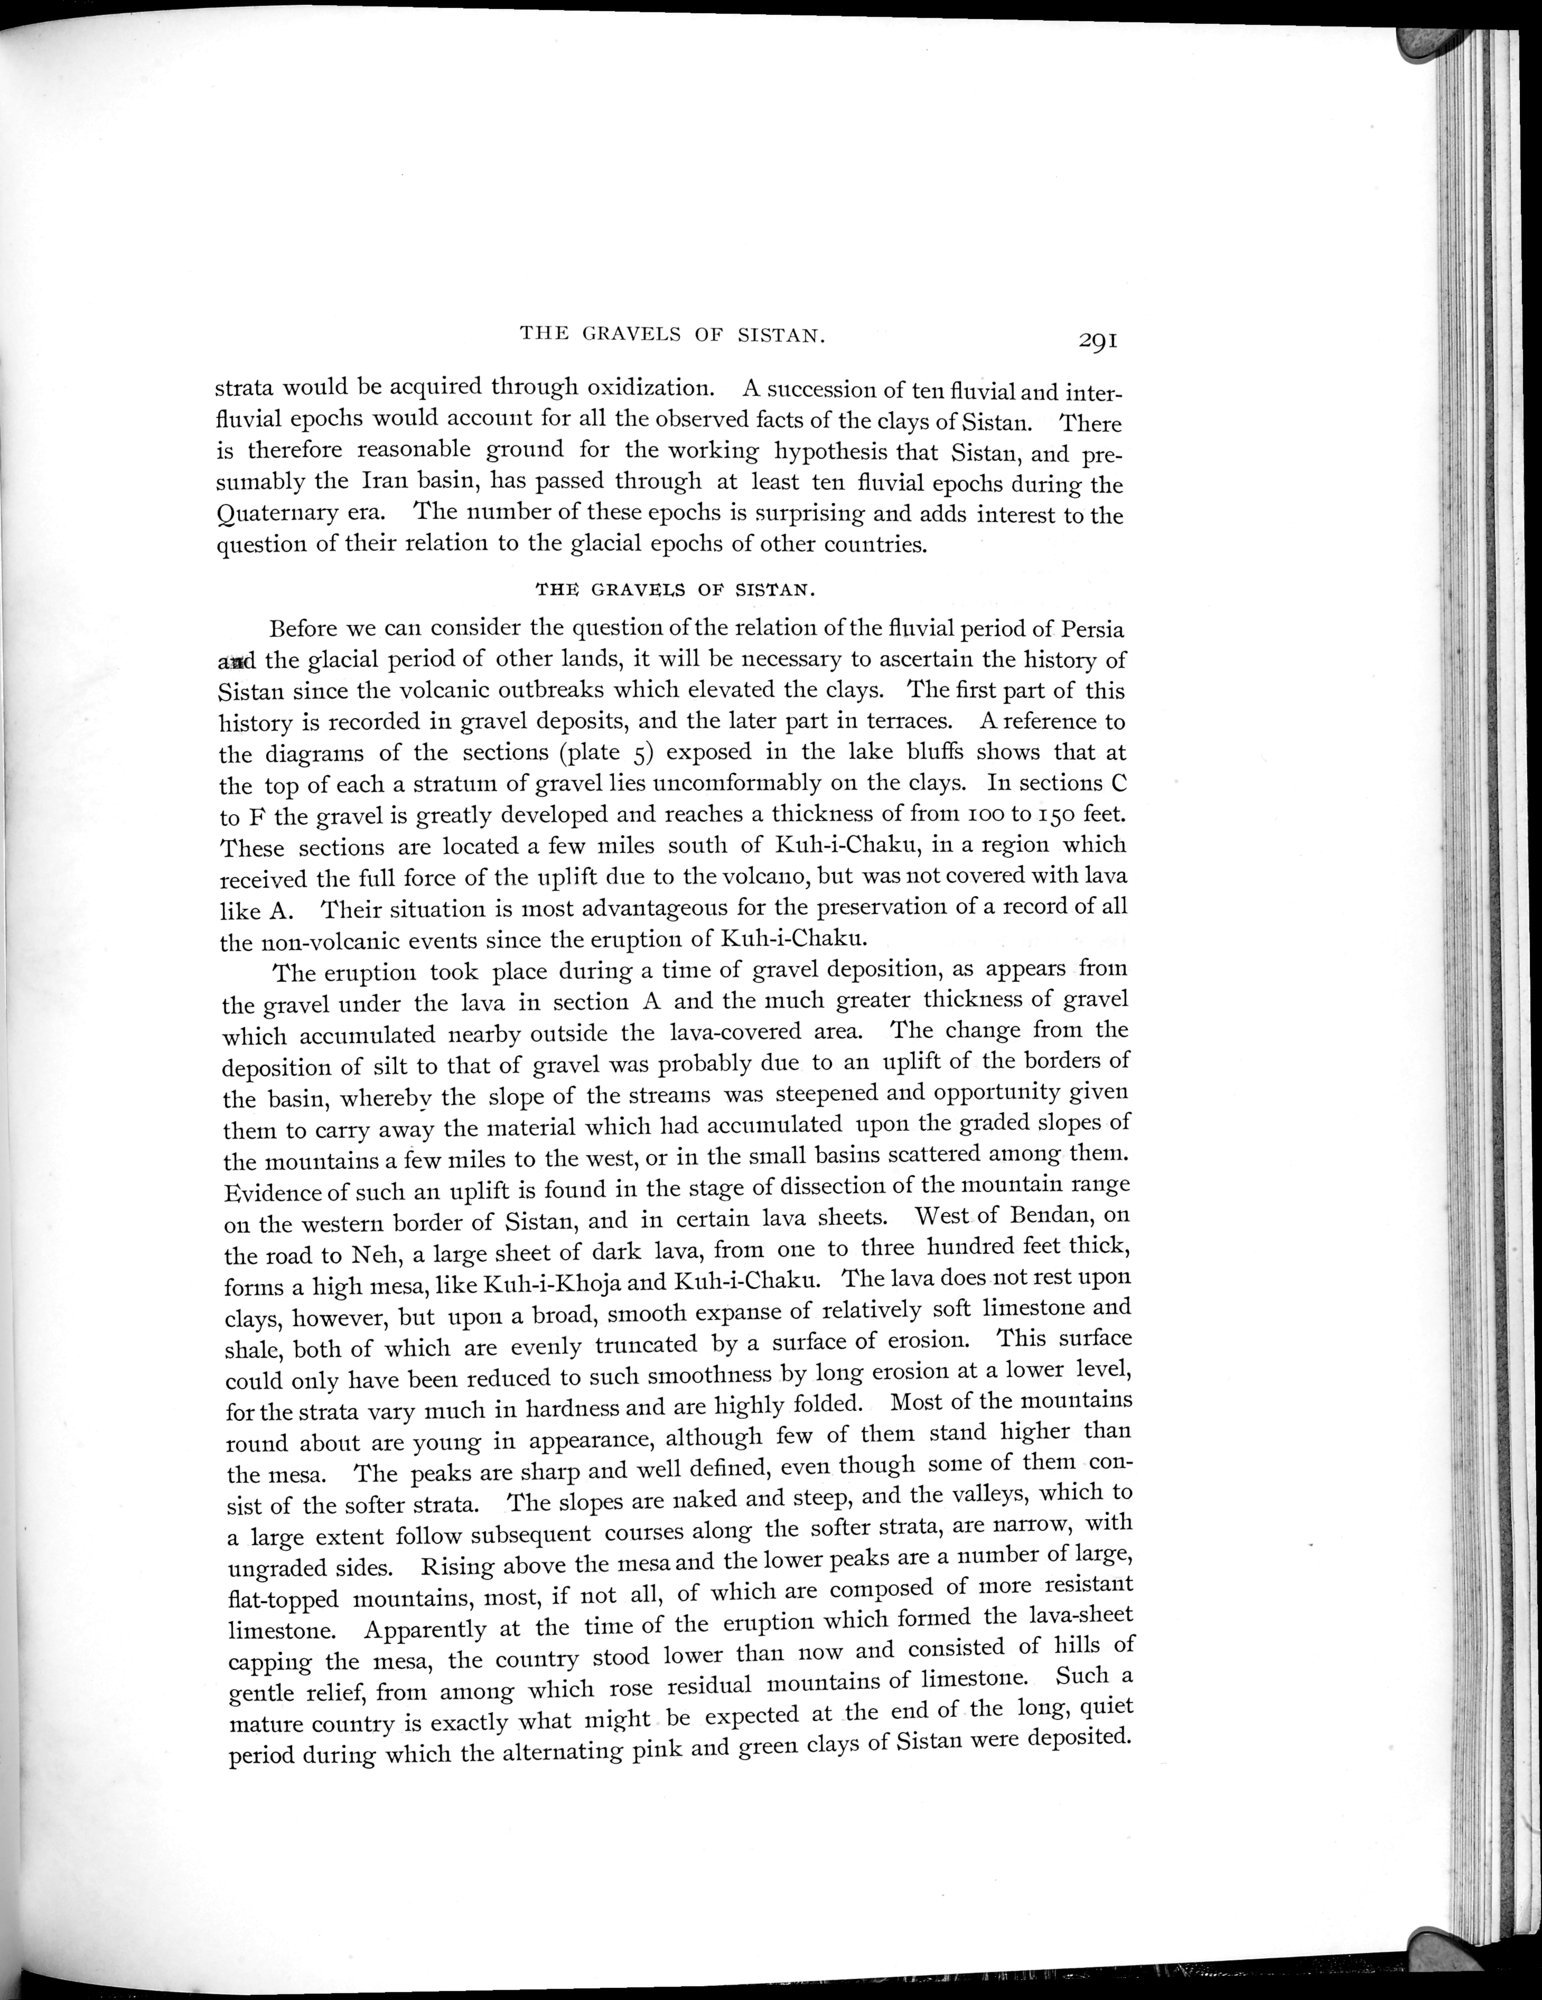 Explorations in Turkestan 1903 : vol.1 / Page 327 (Grayscale High Resolution Image)